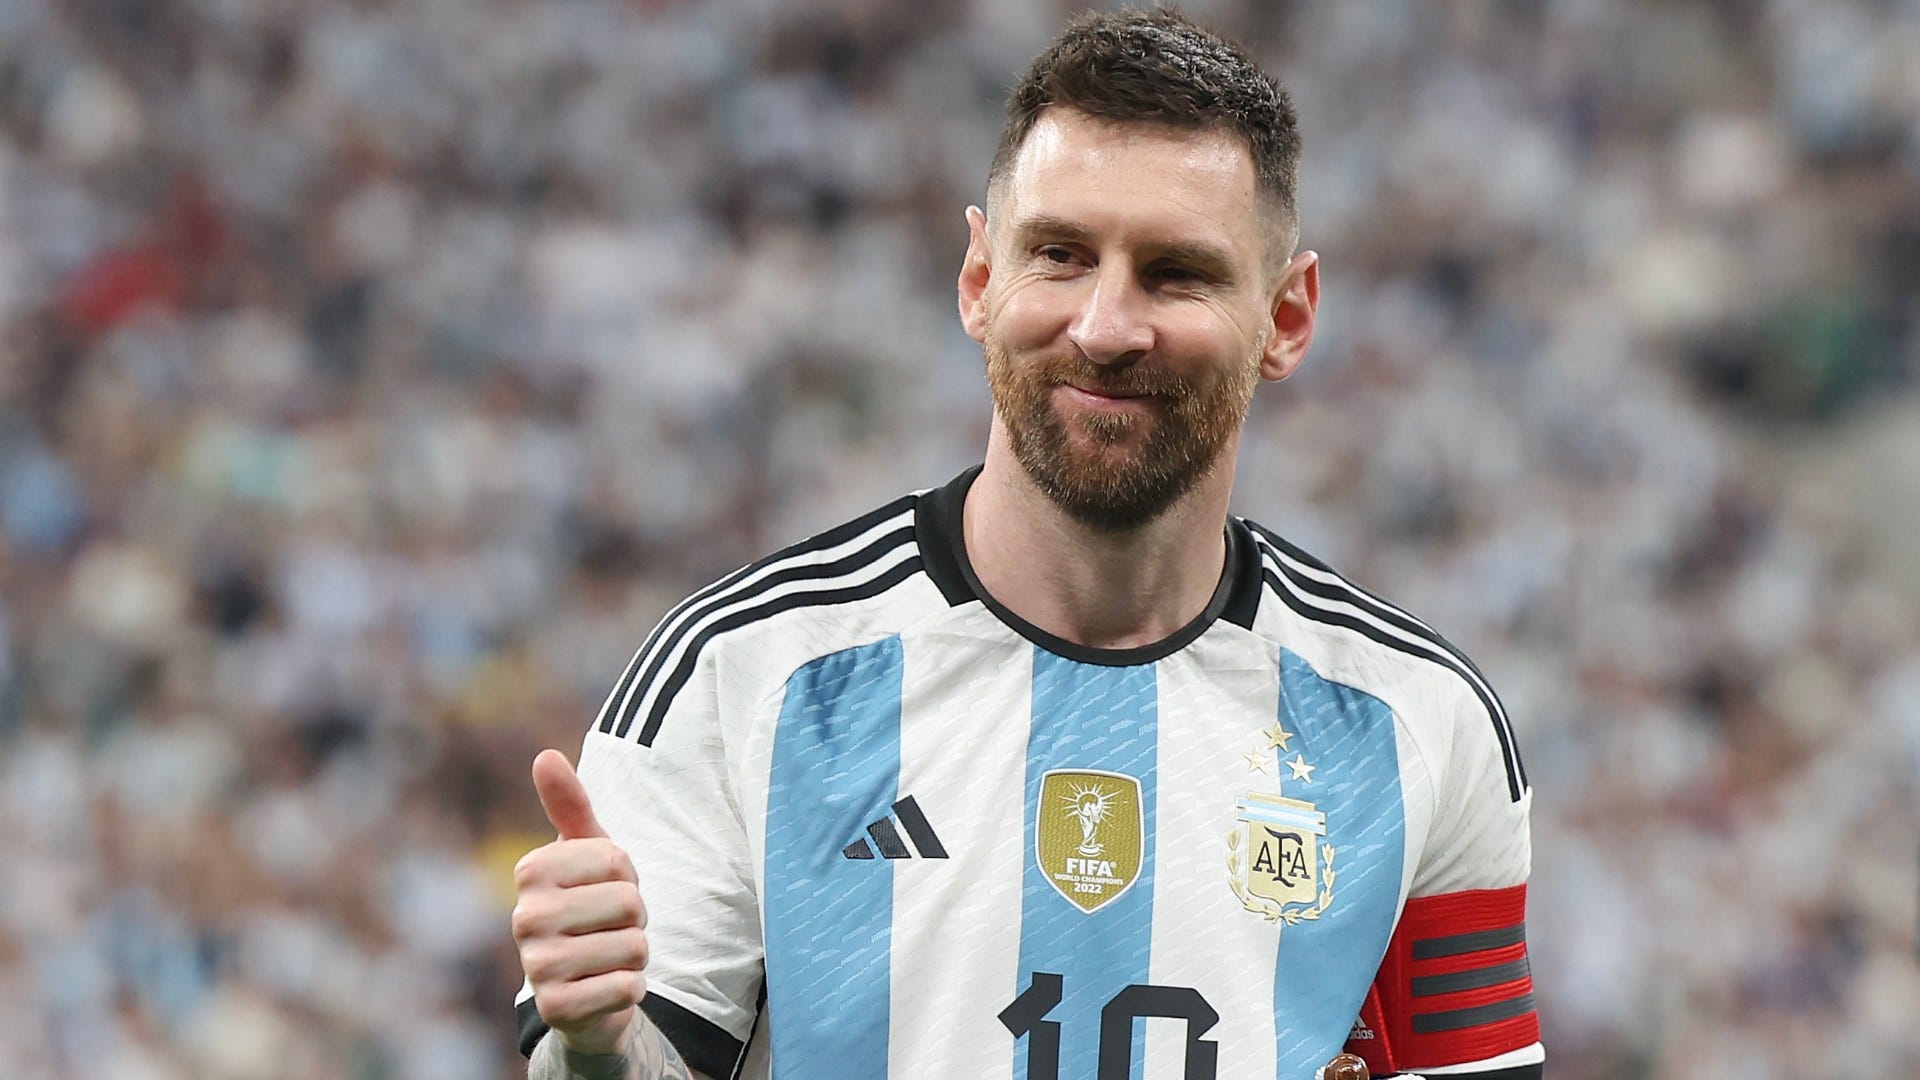 lionel-messi-is-coming-to-d-c-but-not-with-inter-miami-argentina-schedule-copa-america-tune-up-against-guatemala-at-washington-s-fedex-field-or-goal-com